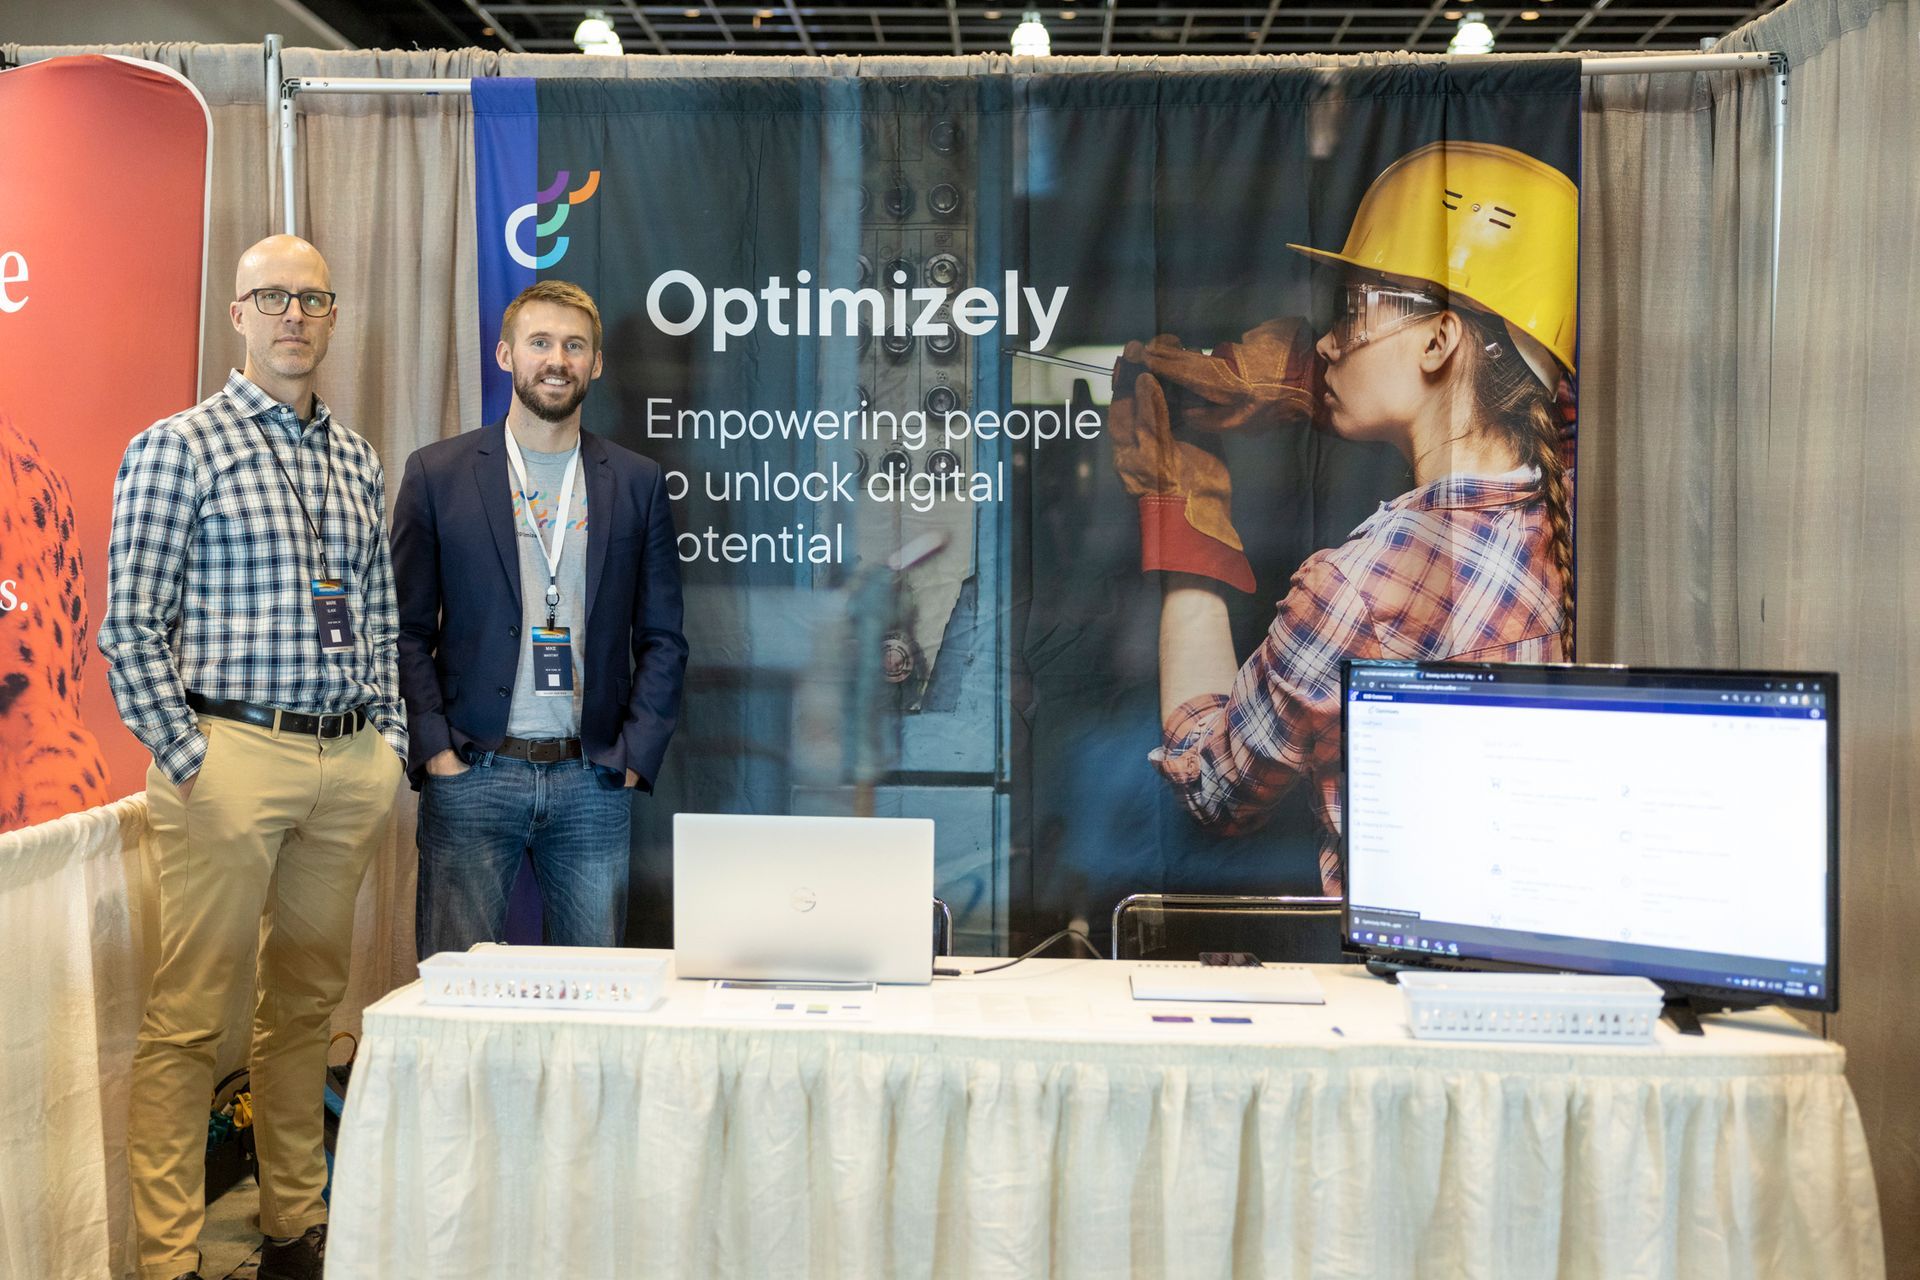 Optimizely booth featuring two men standing to the left of a white skirted table. Behind them a mural reads Optimizely - Empowering People to unlock digital potential